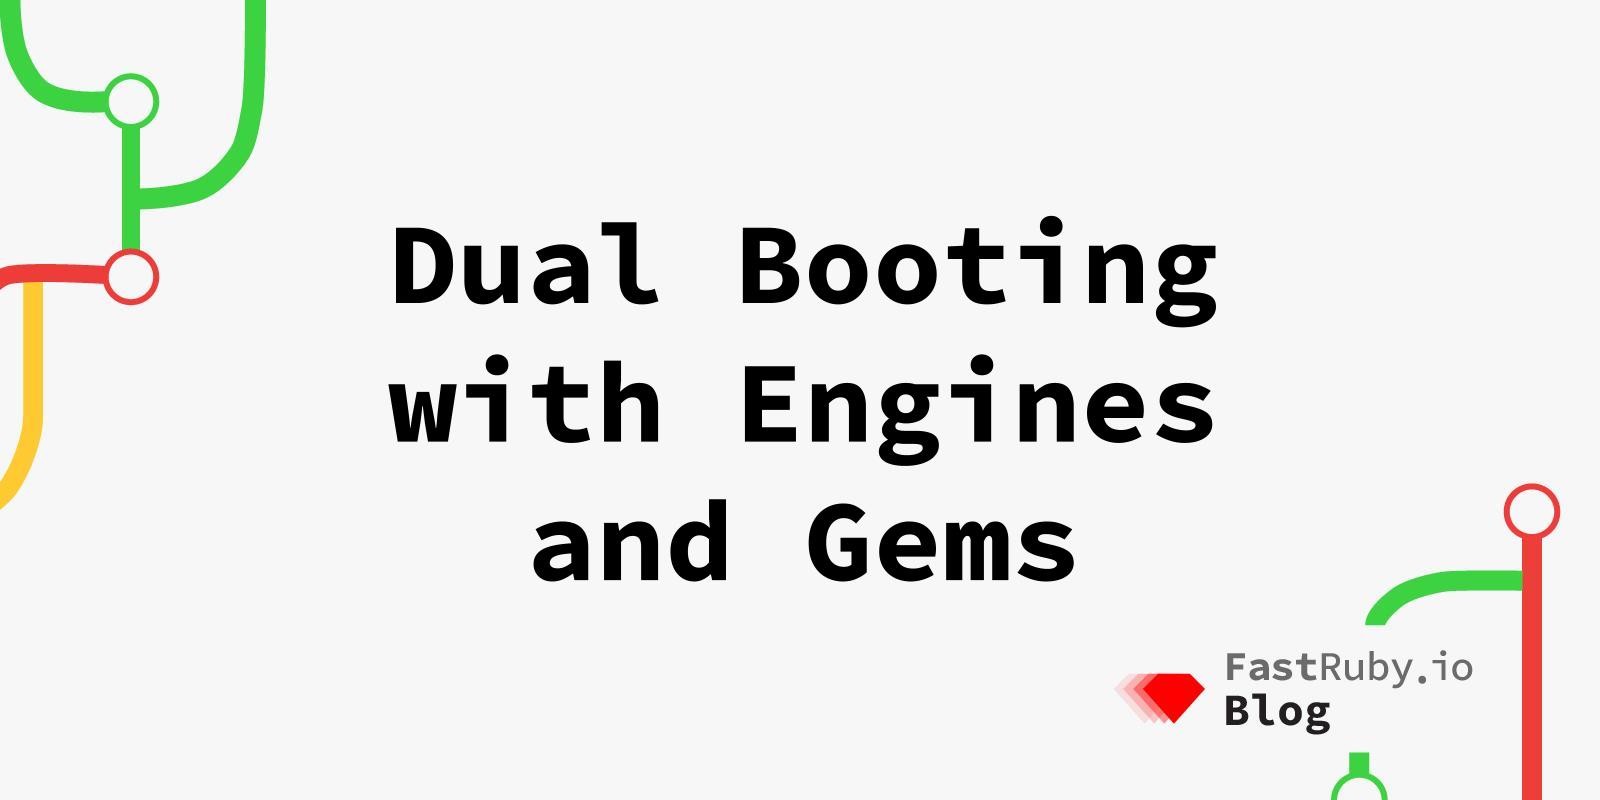 Dual Booting with Engines and Gems